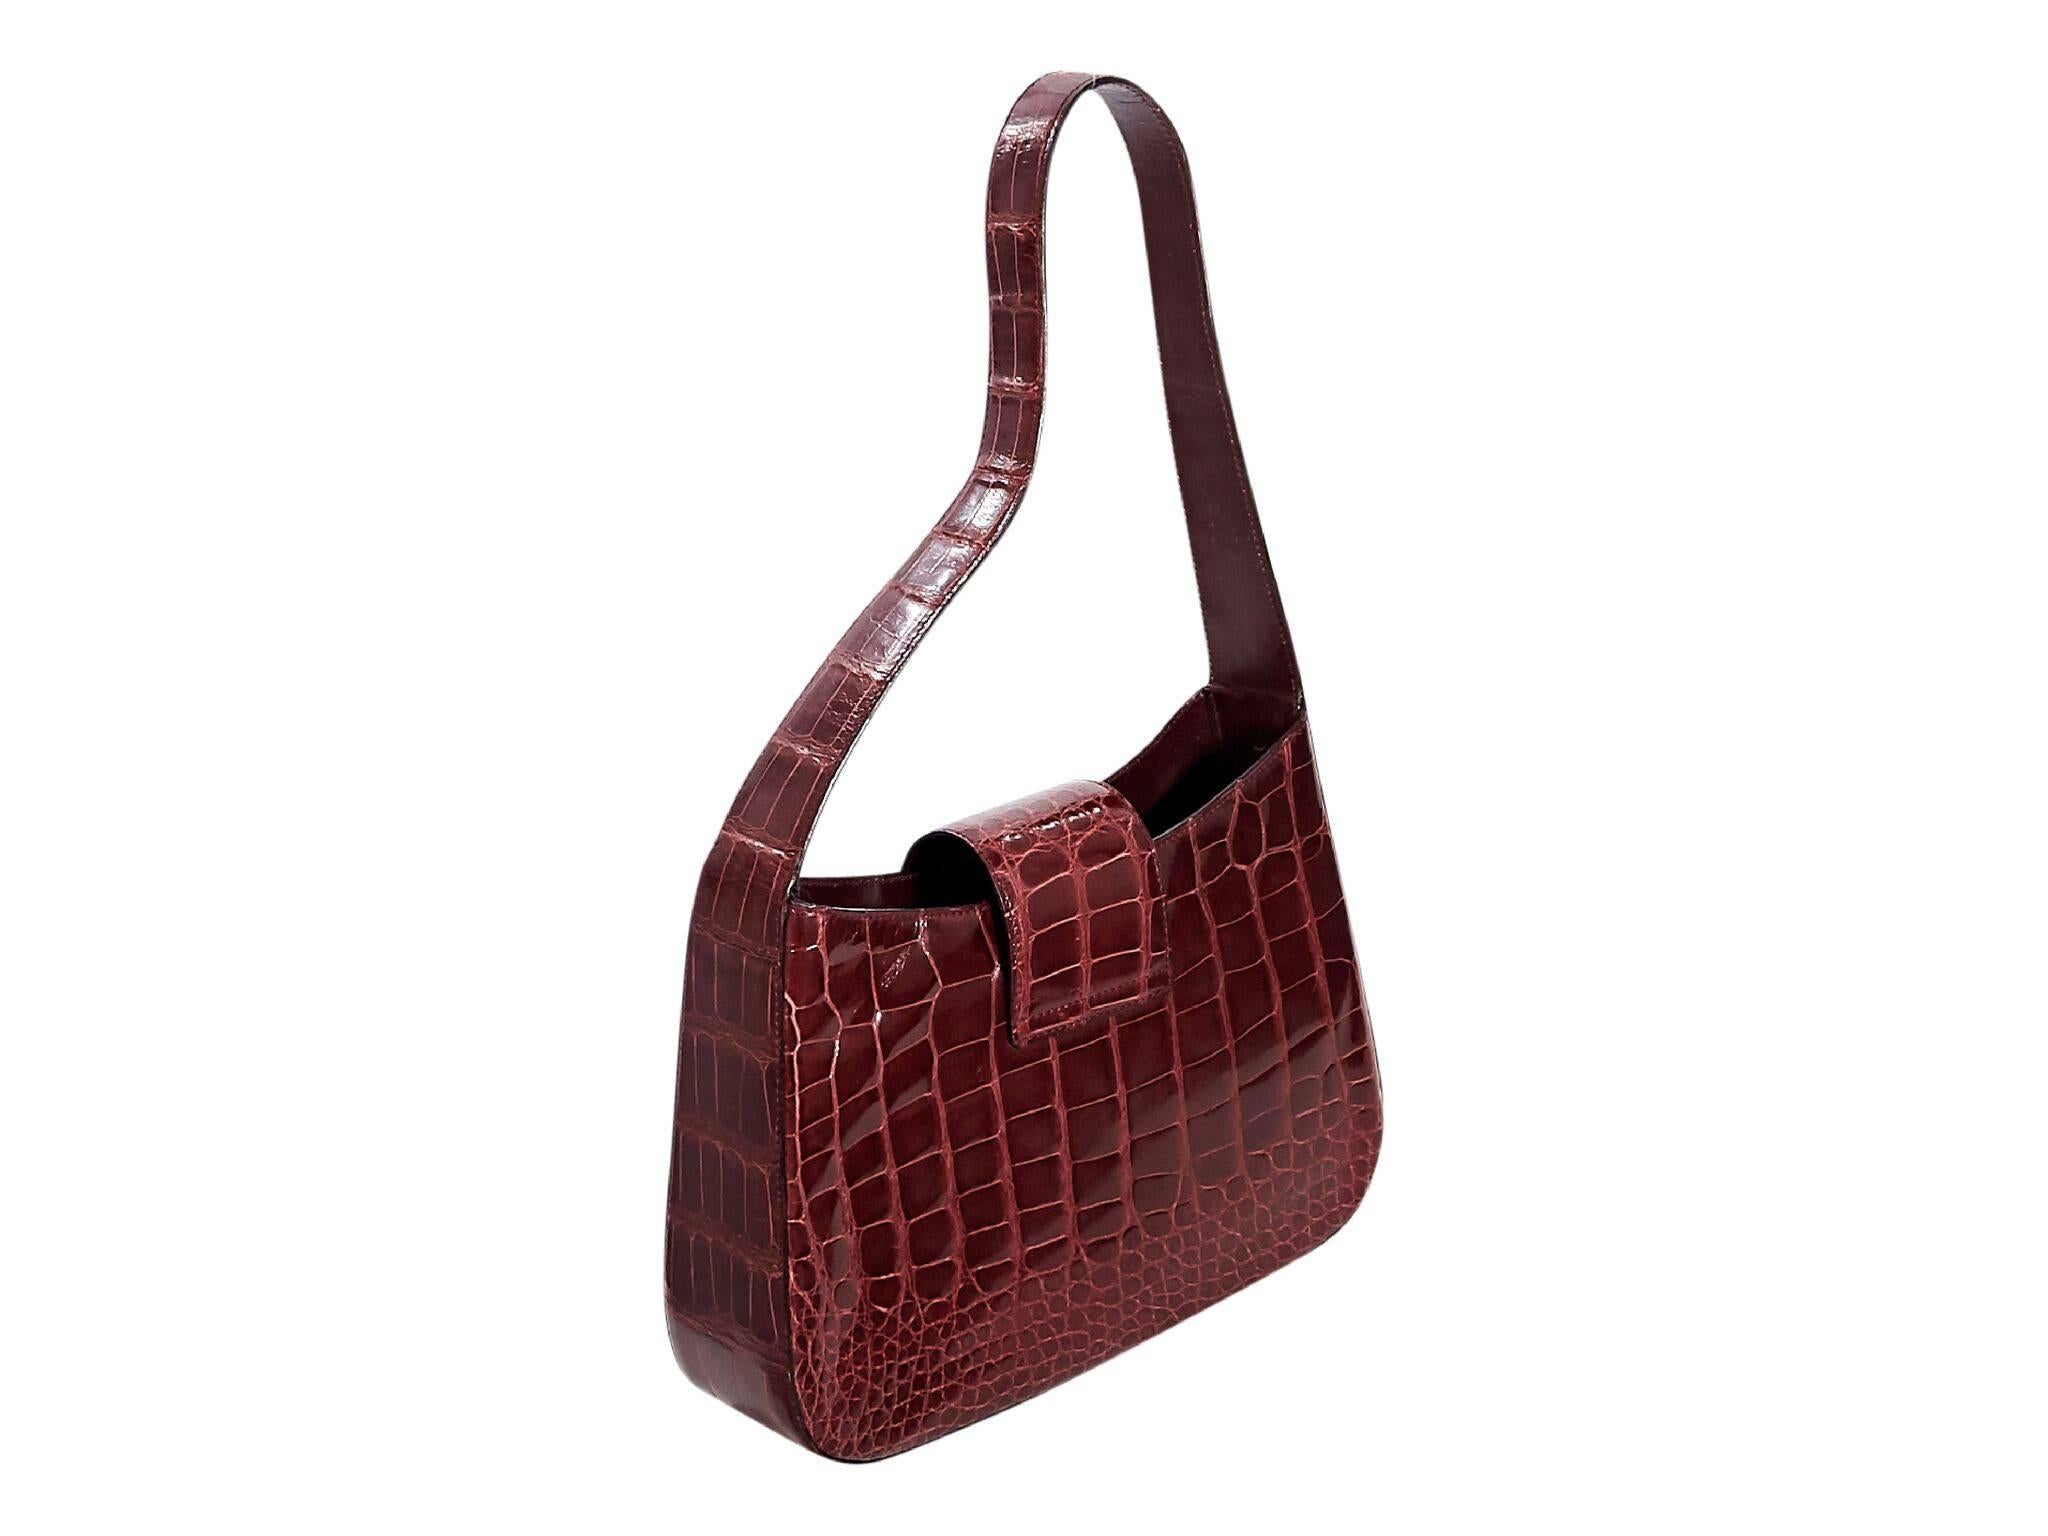 Product details:  Red alligator shoulder bag by Prada.  Single shoulder strap.  Top strap closure.  Lined interior with inner zip pocket.  Silvertone hardware.  Authenticity card included.  11